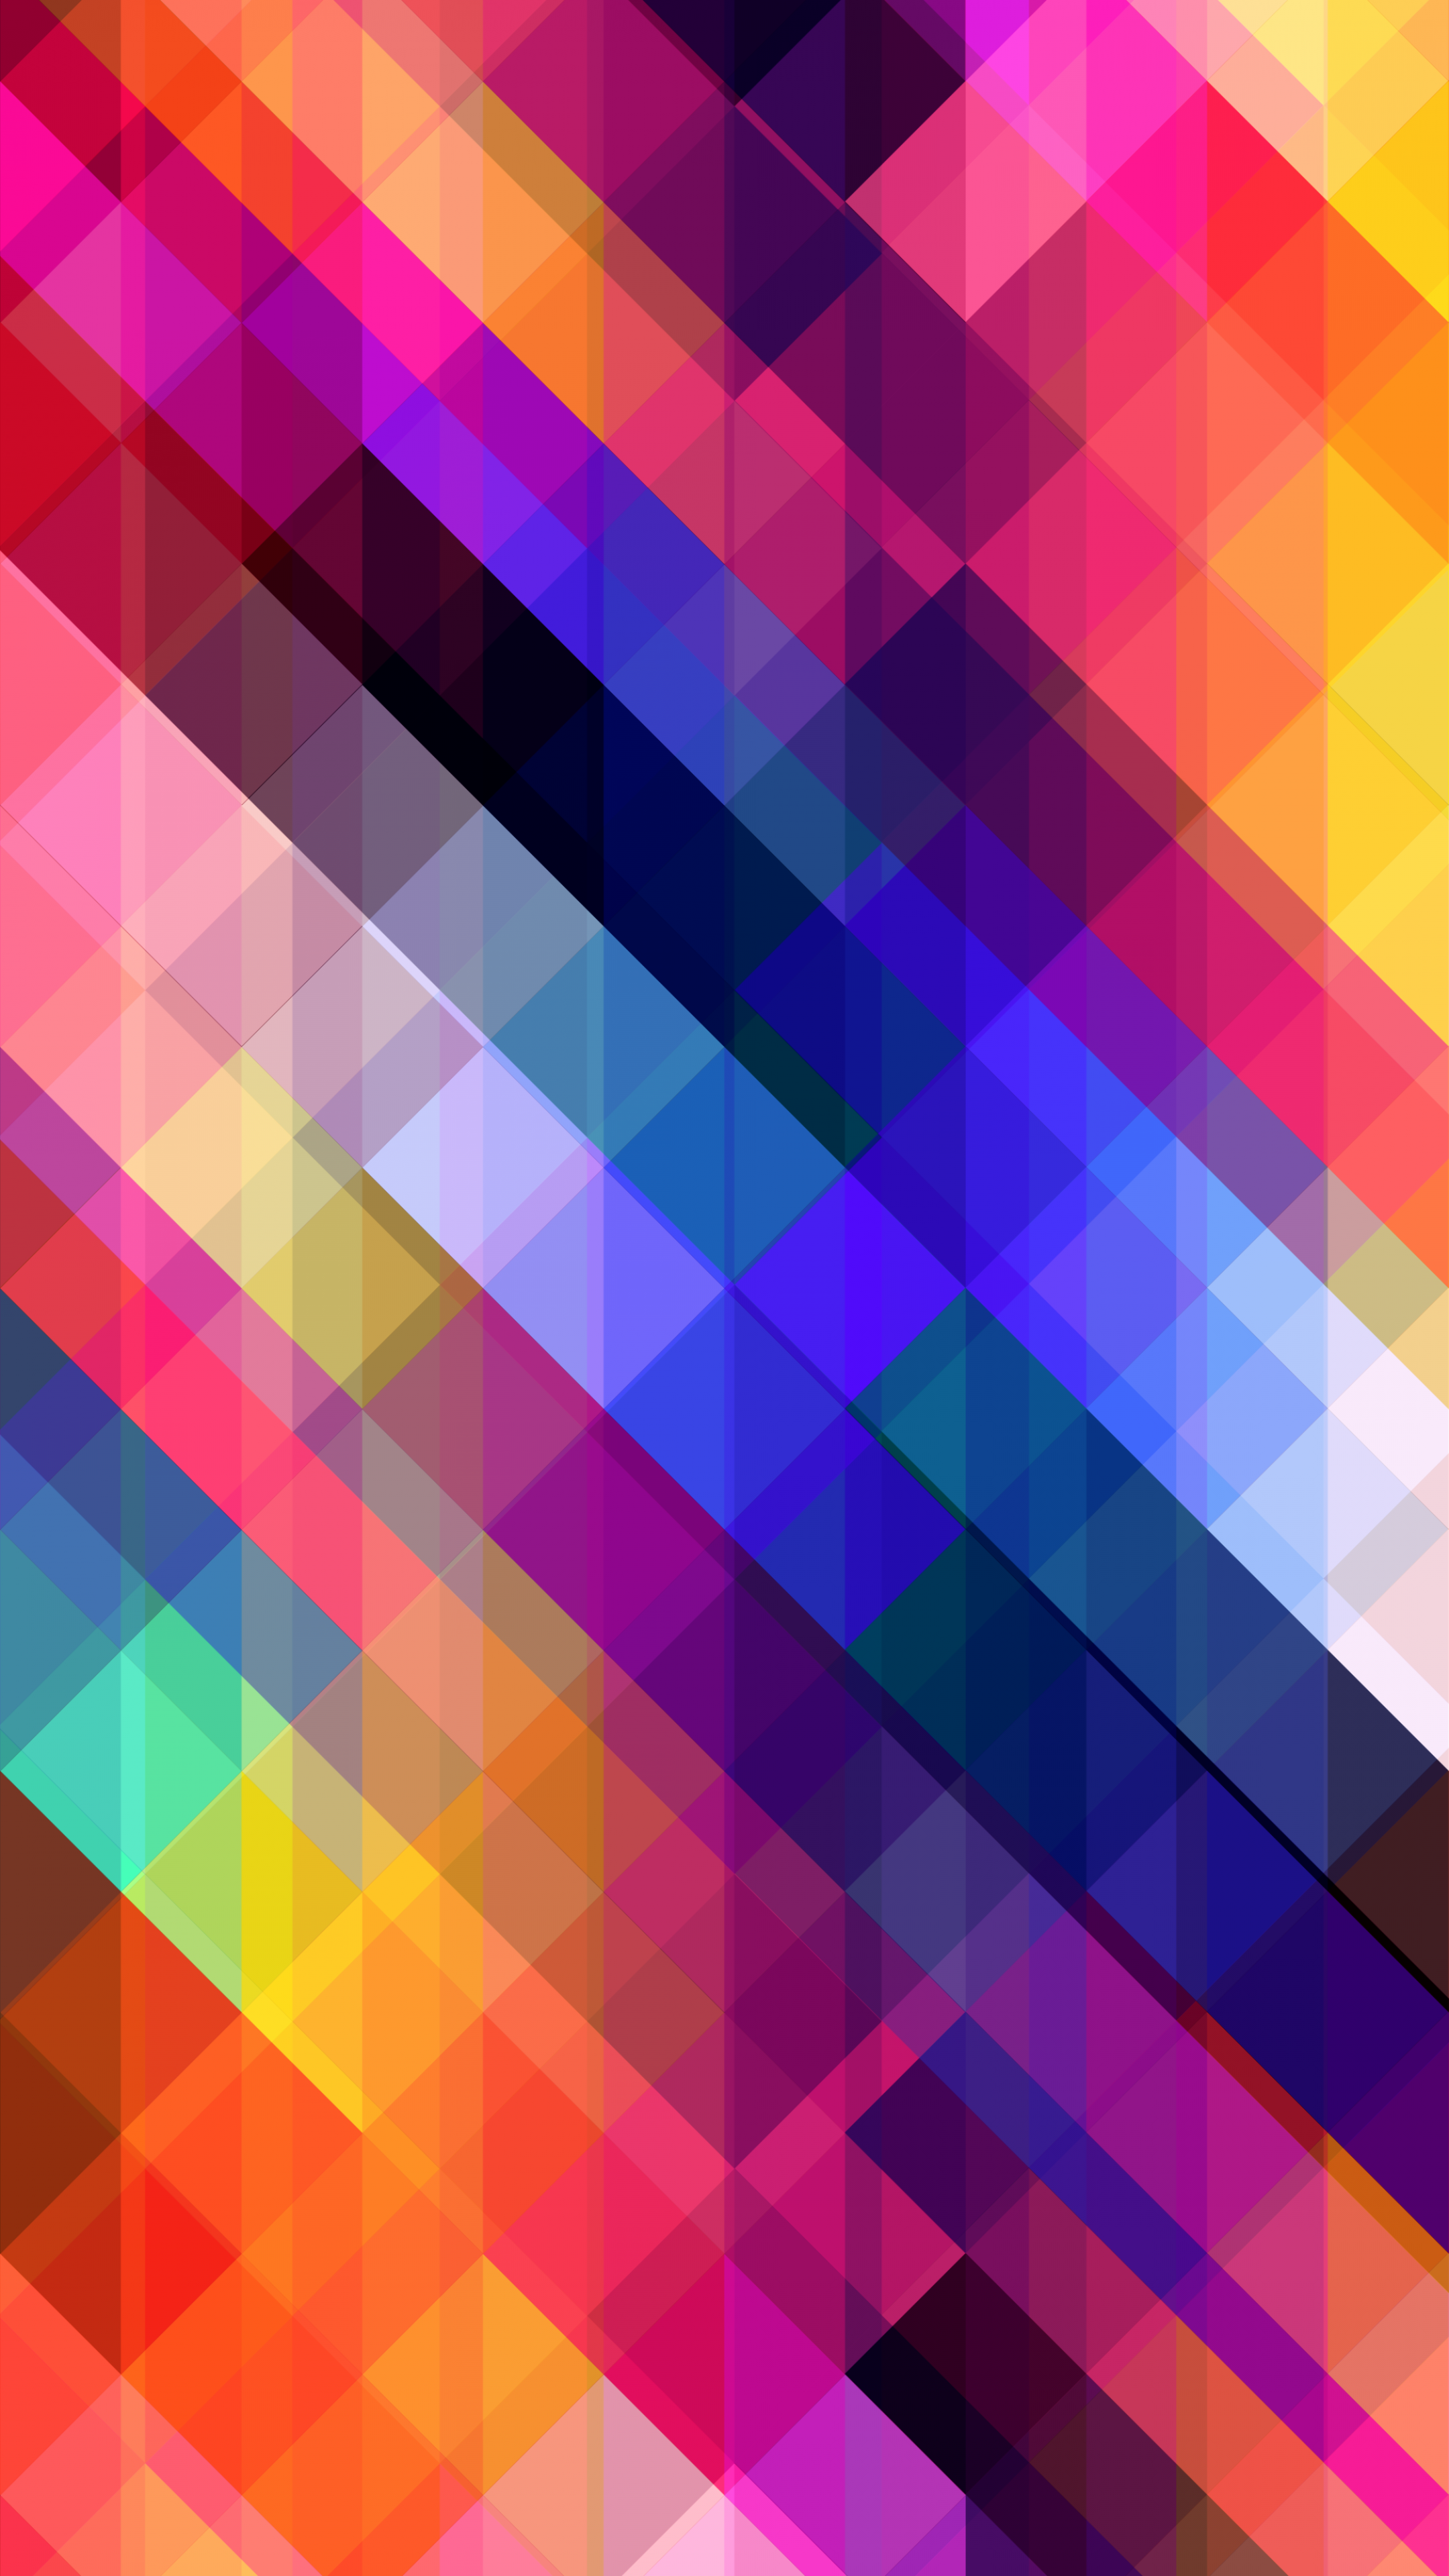 Stripes, crossed, multicolored, abstract, 2160x3840 wallpaper. Colorful wallpaper, Android wallpaper, Cellphone wallpaper